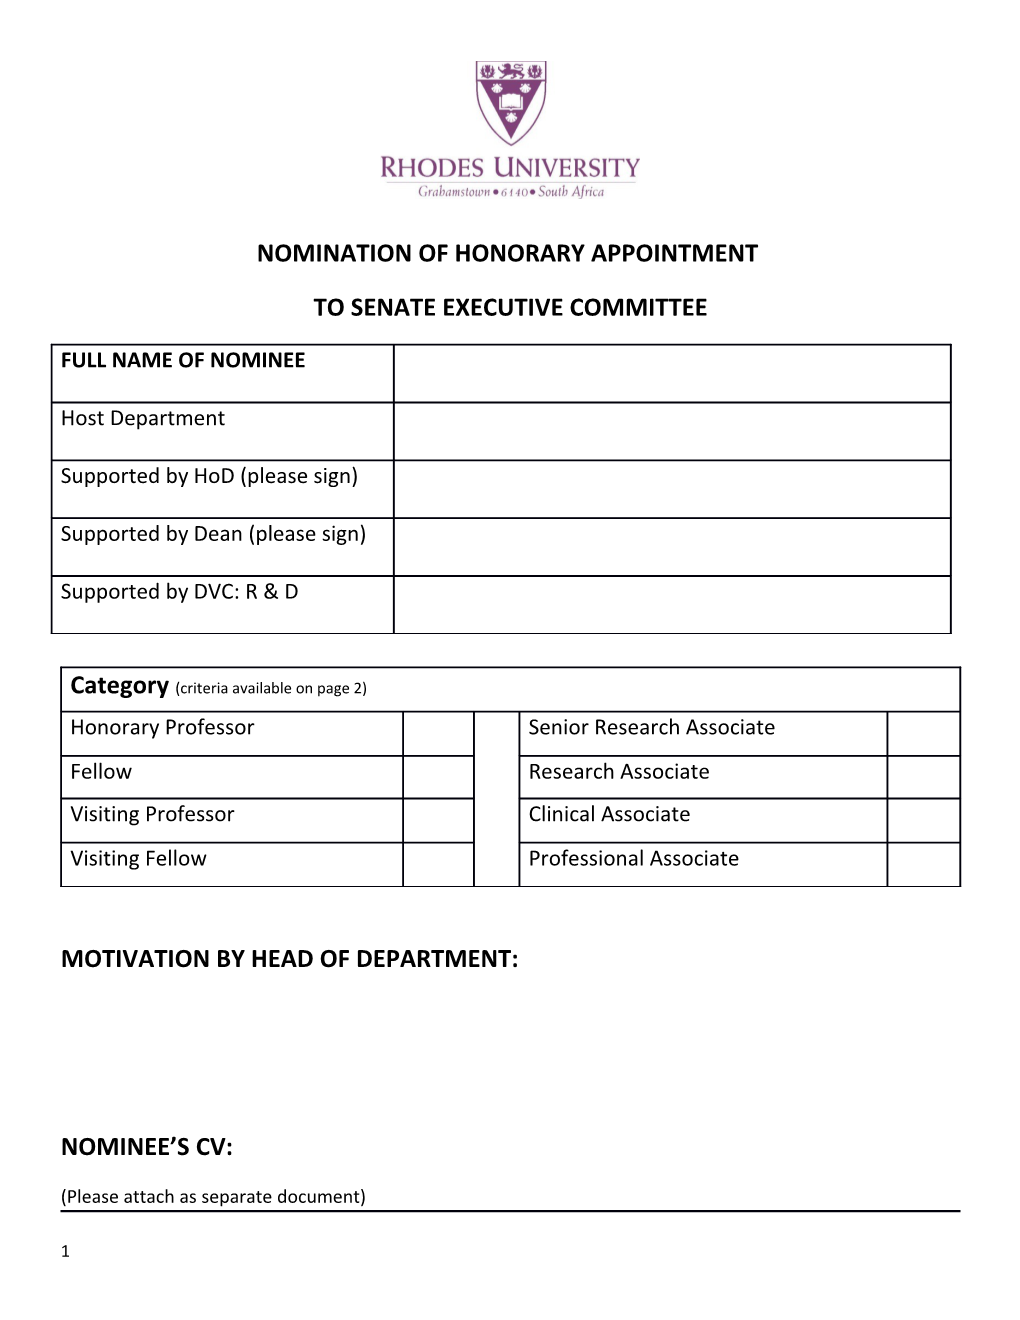 Nomination of Honorary Appointment